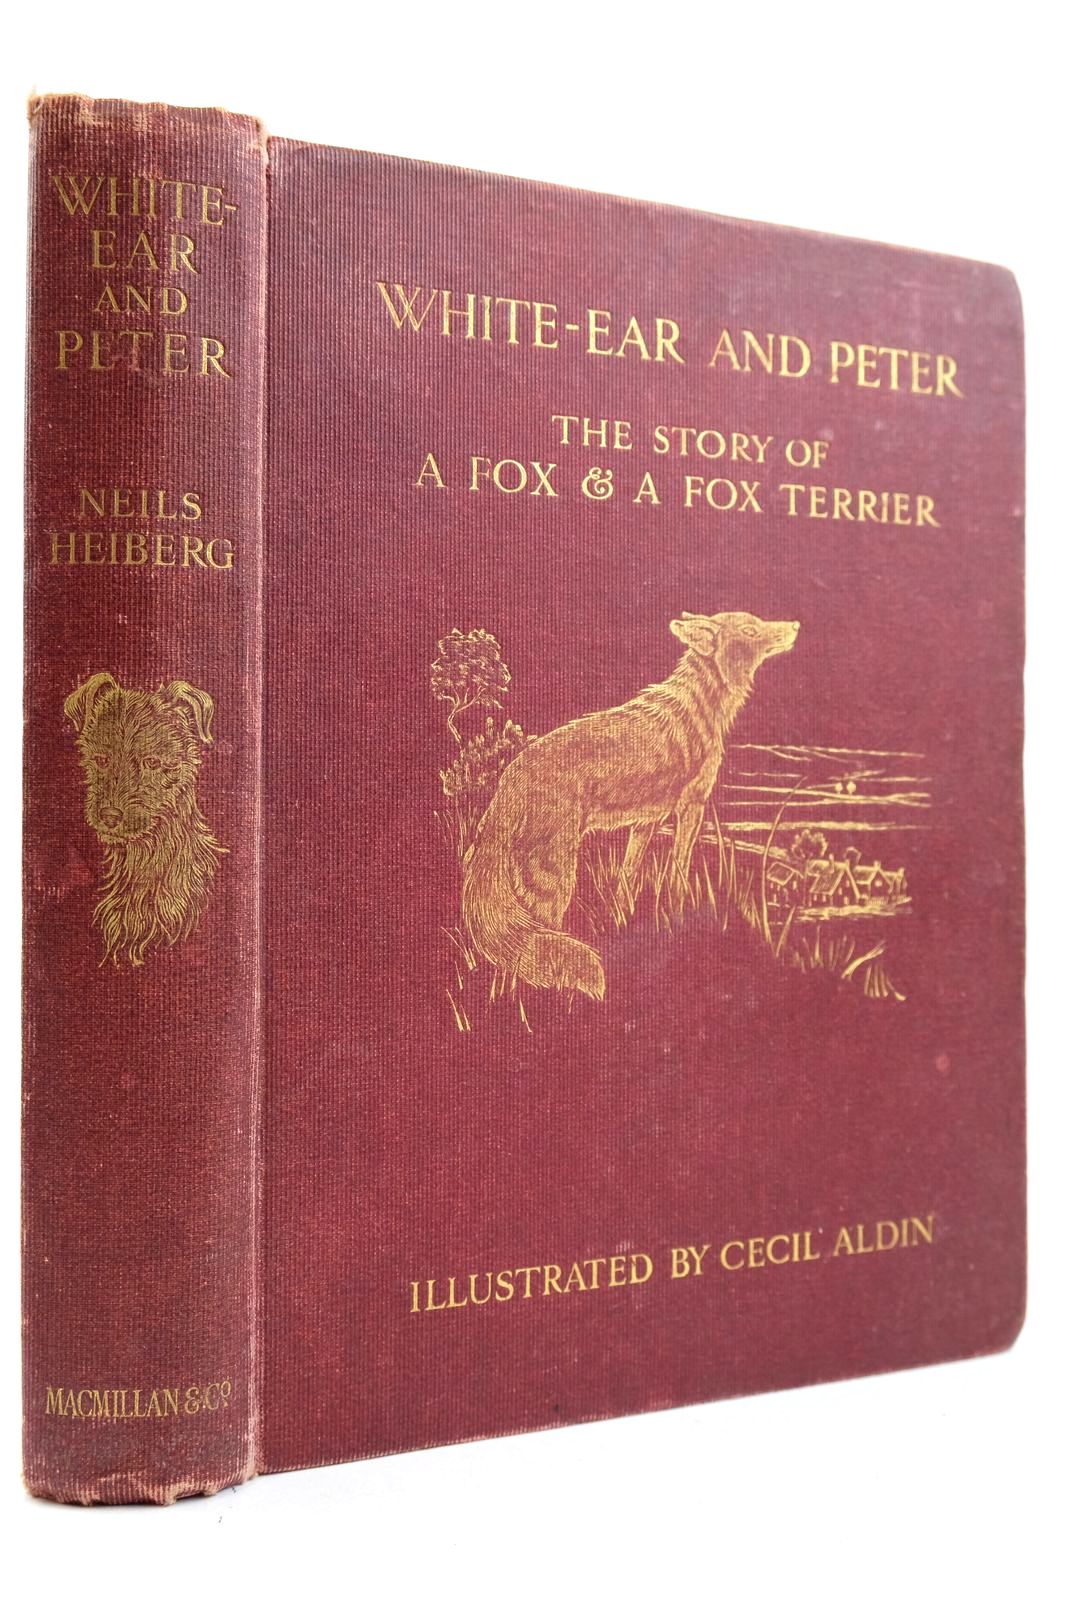 Photo of WHITE-EAR AND PETER written by Heiberg, Neils illustrated by Aldin, Cecil published by Macmillan & Co. Ltd. (STOCK CODE: 2133287)  for sale by Stella & Rose's Books